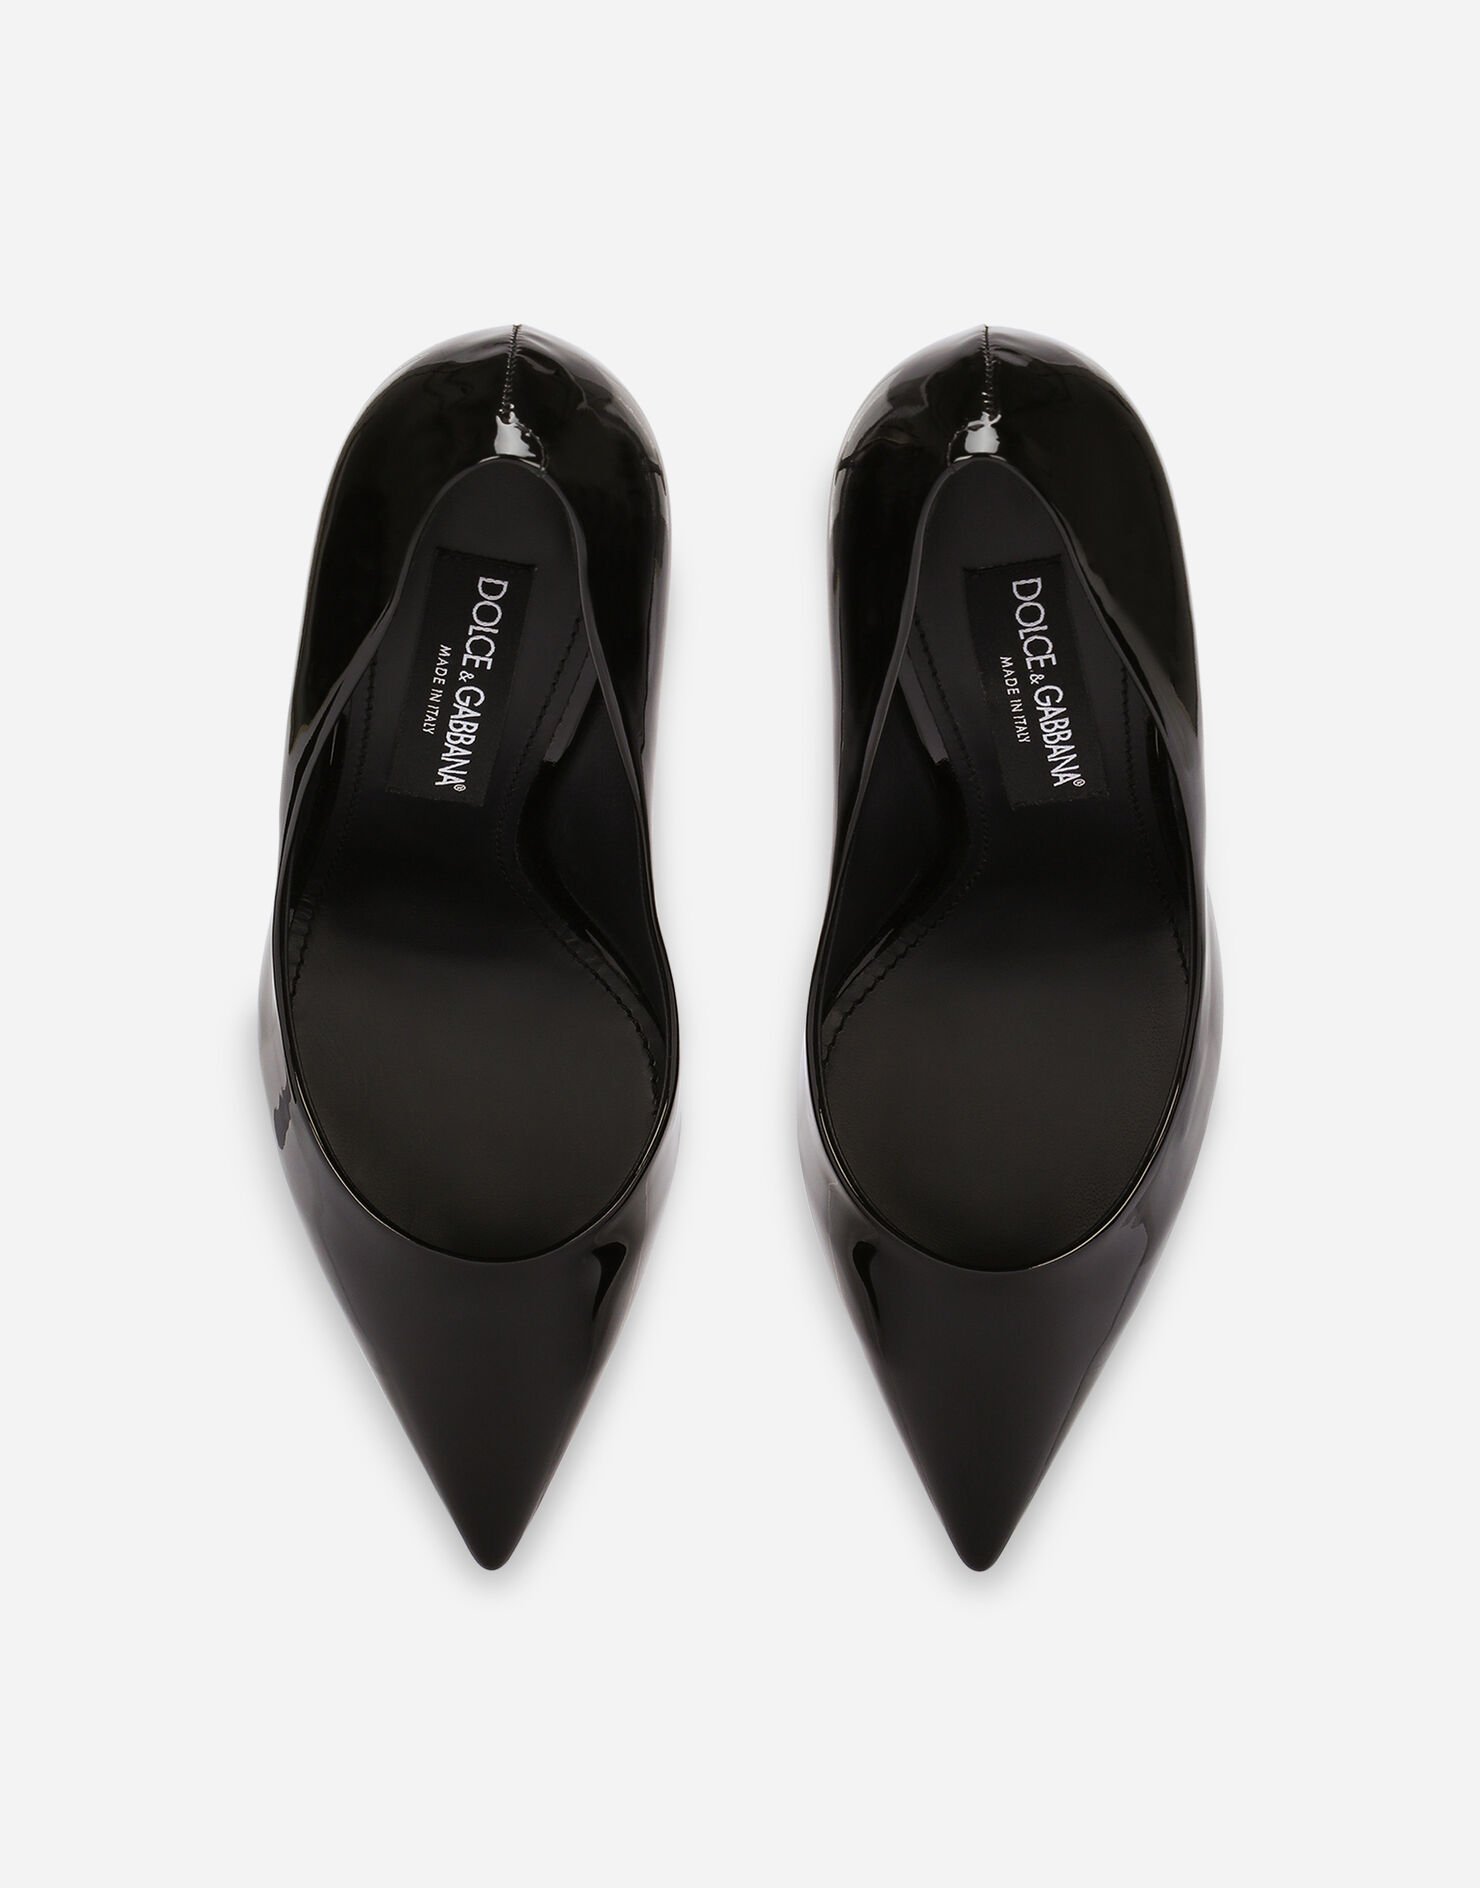 Patent leather Cardinale pumps in Black for | Dolce&Gabbana® US